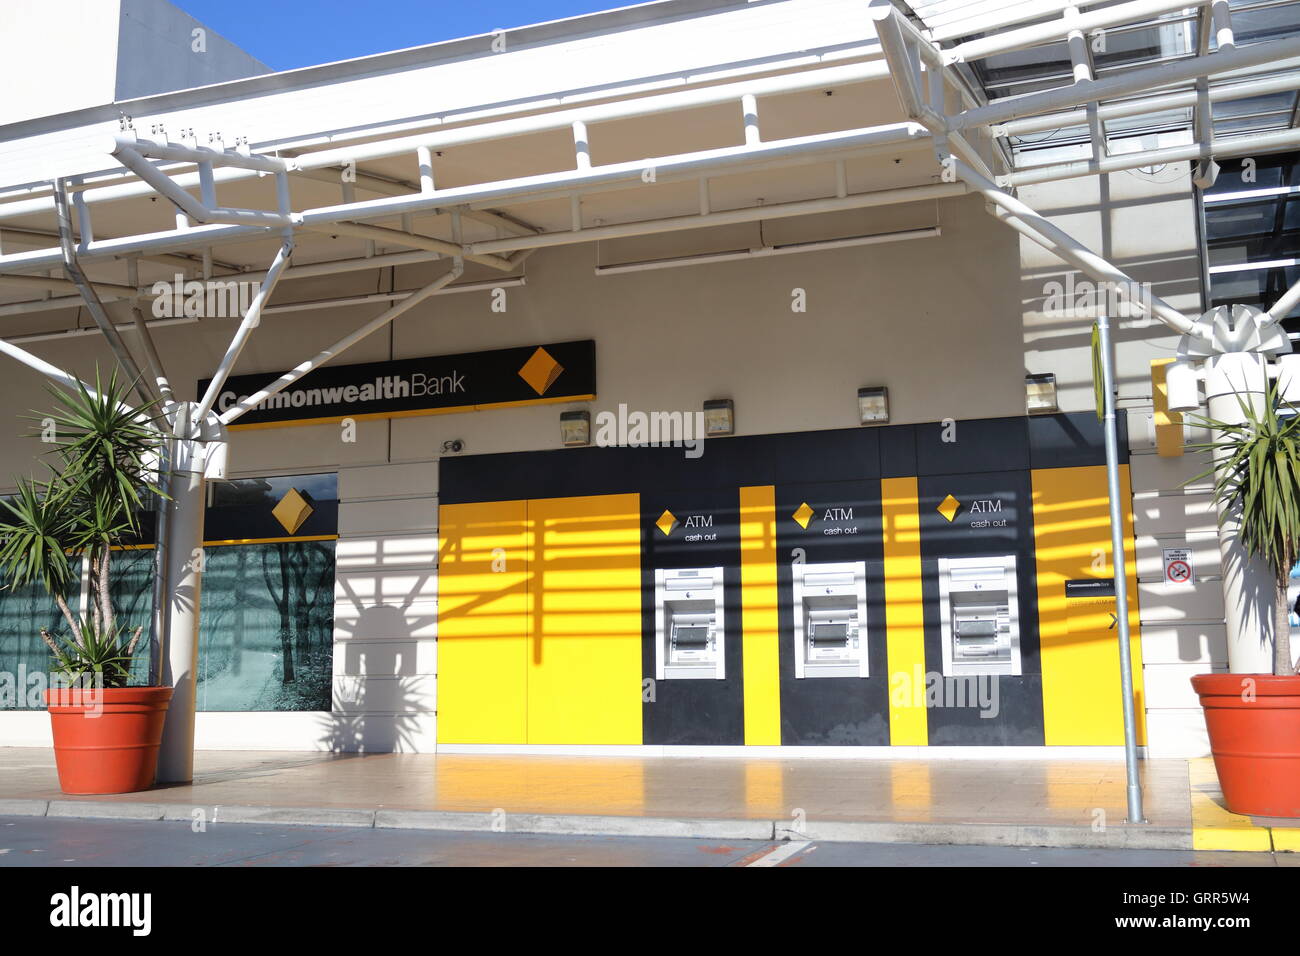 One of the largest Australian bank, Commonwealth Bank In Dandenong Plaza Victoria Australia Stock Photo